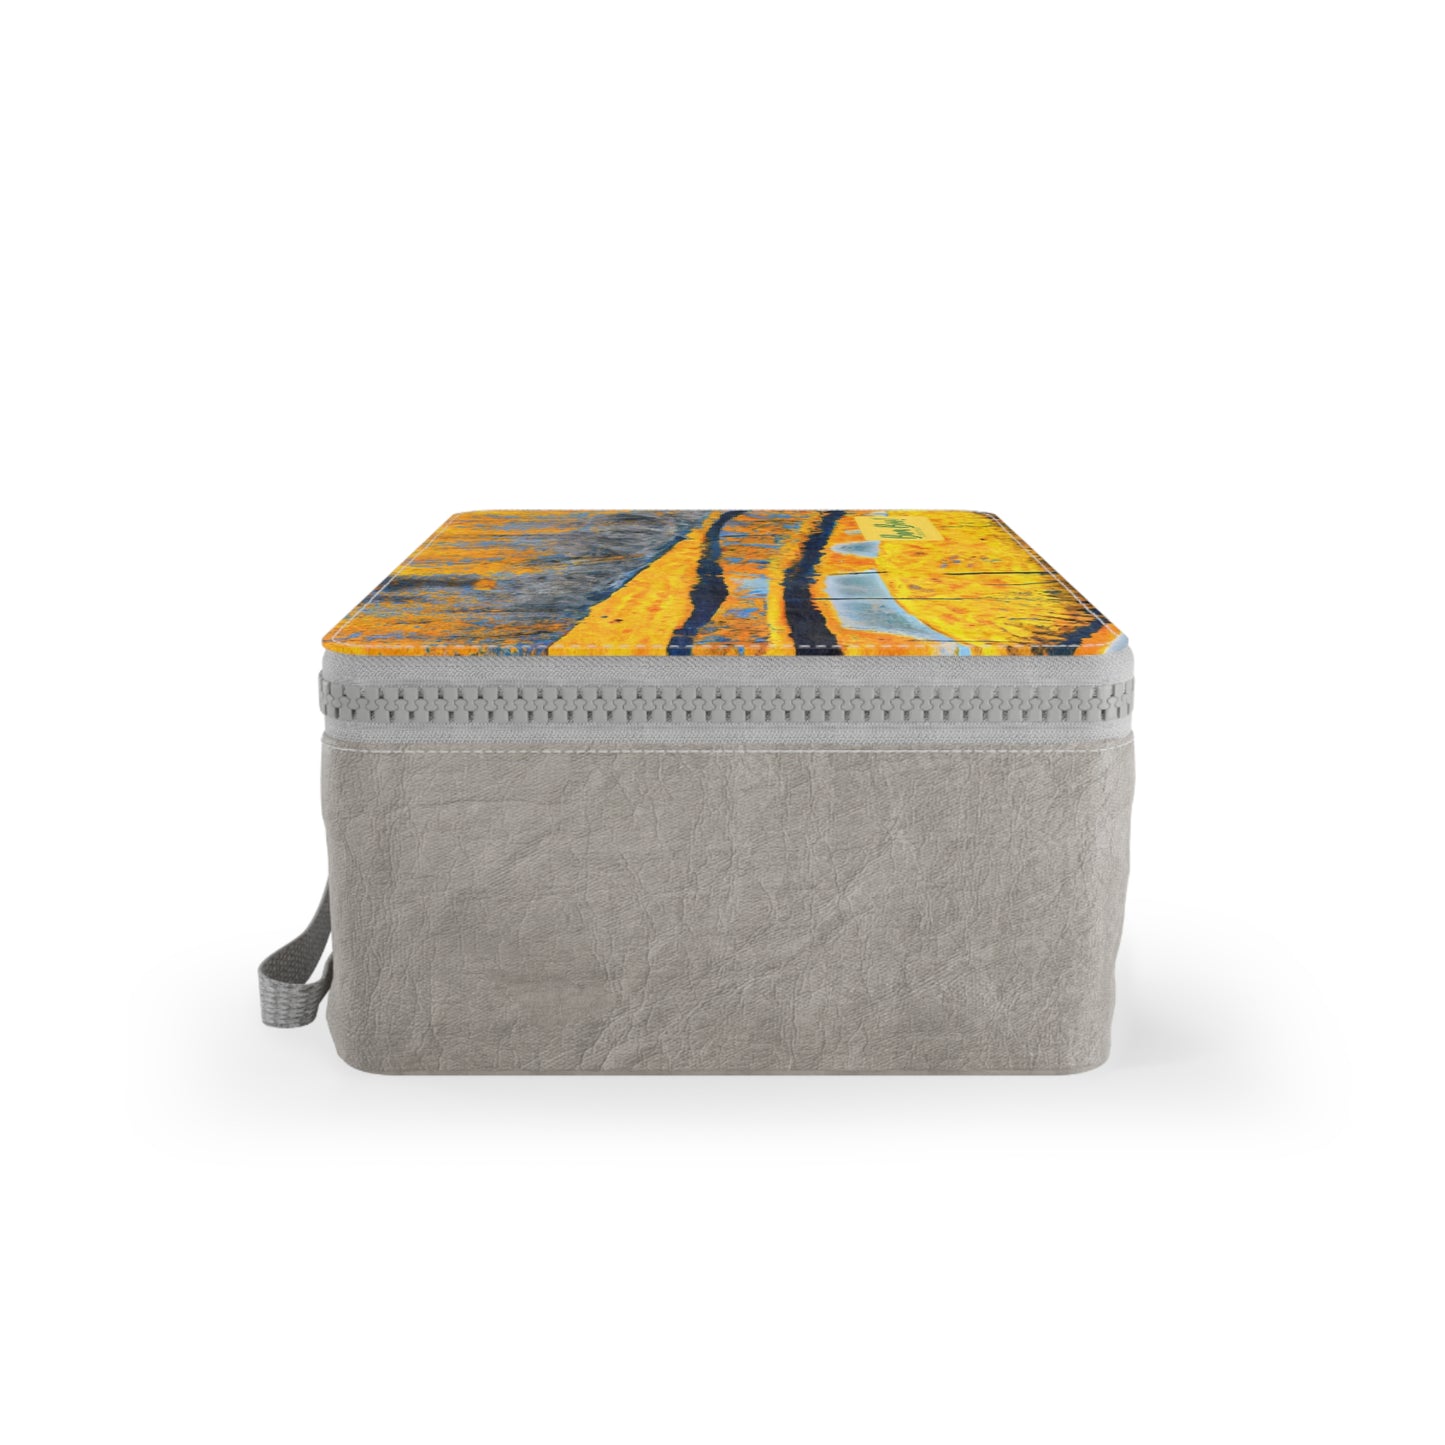 "Nature's Bold Abstractation" - Bam Boo! Lifestyle Eco-friendly Paper Lunch Bag